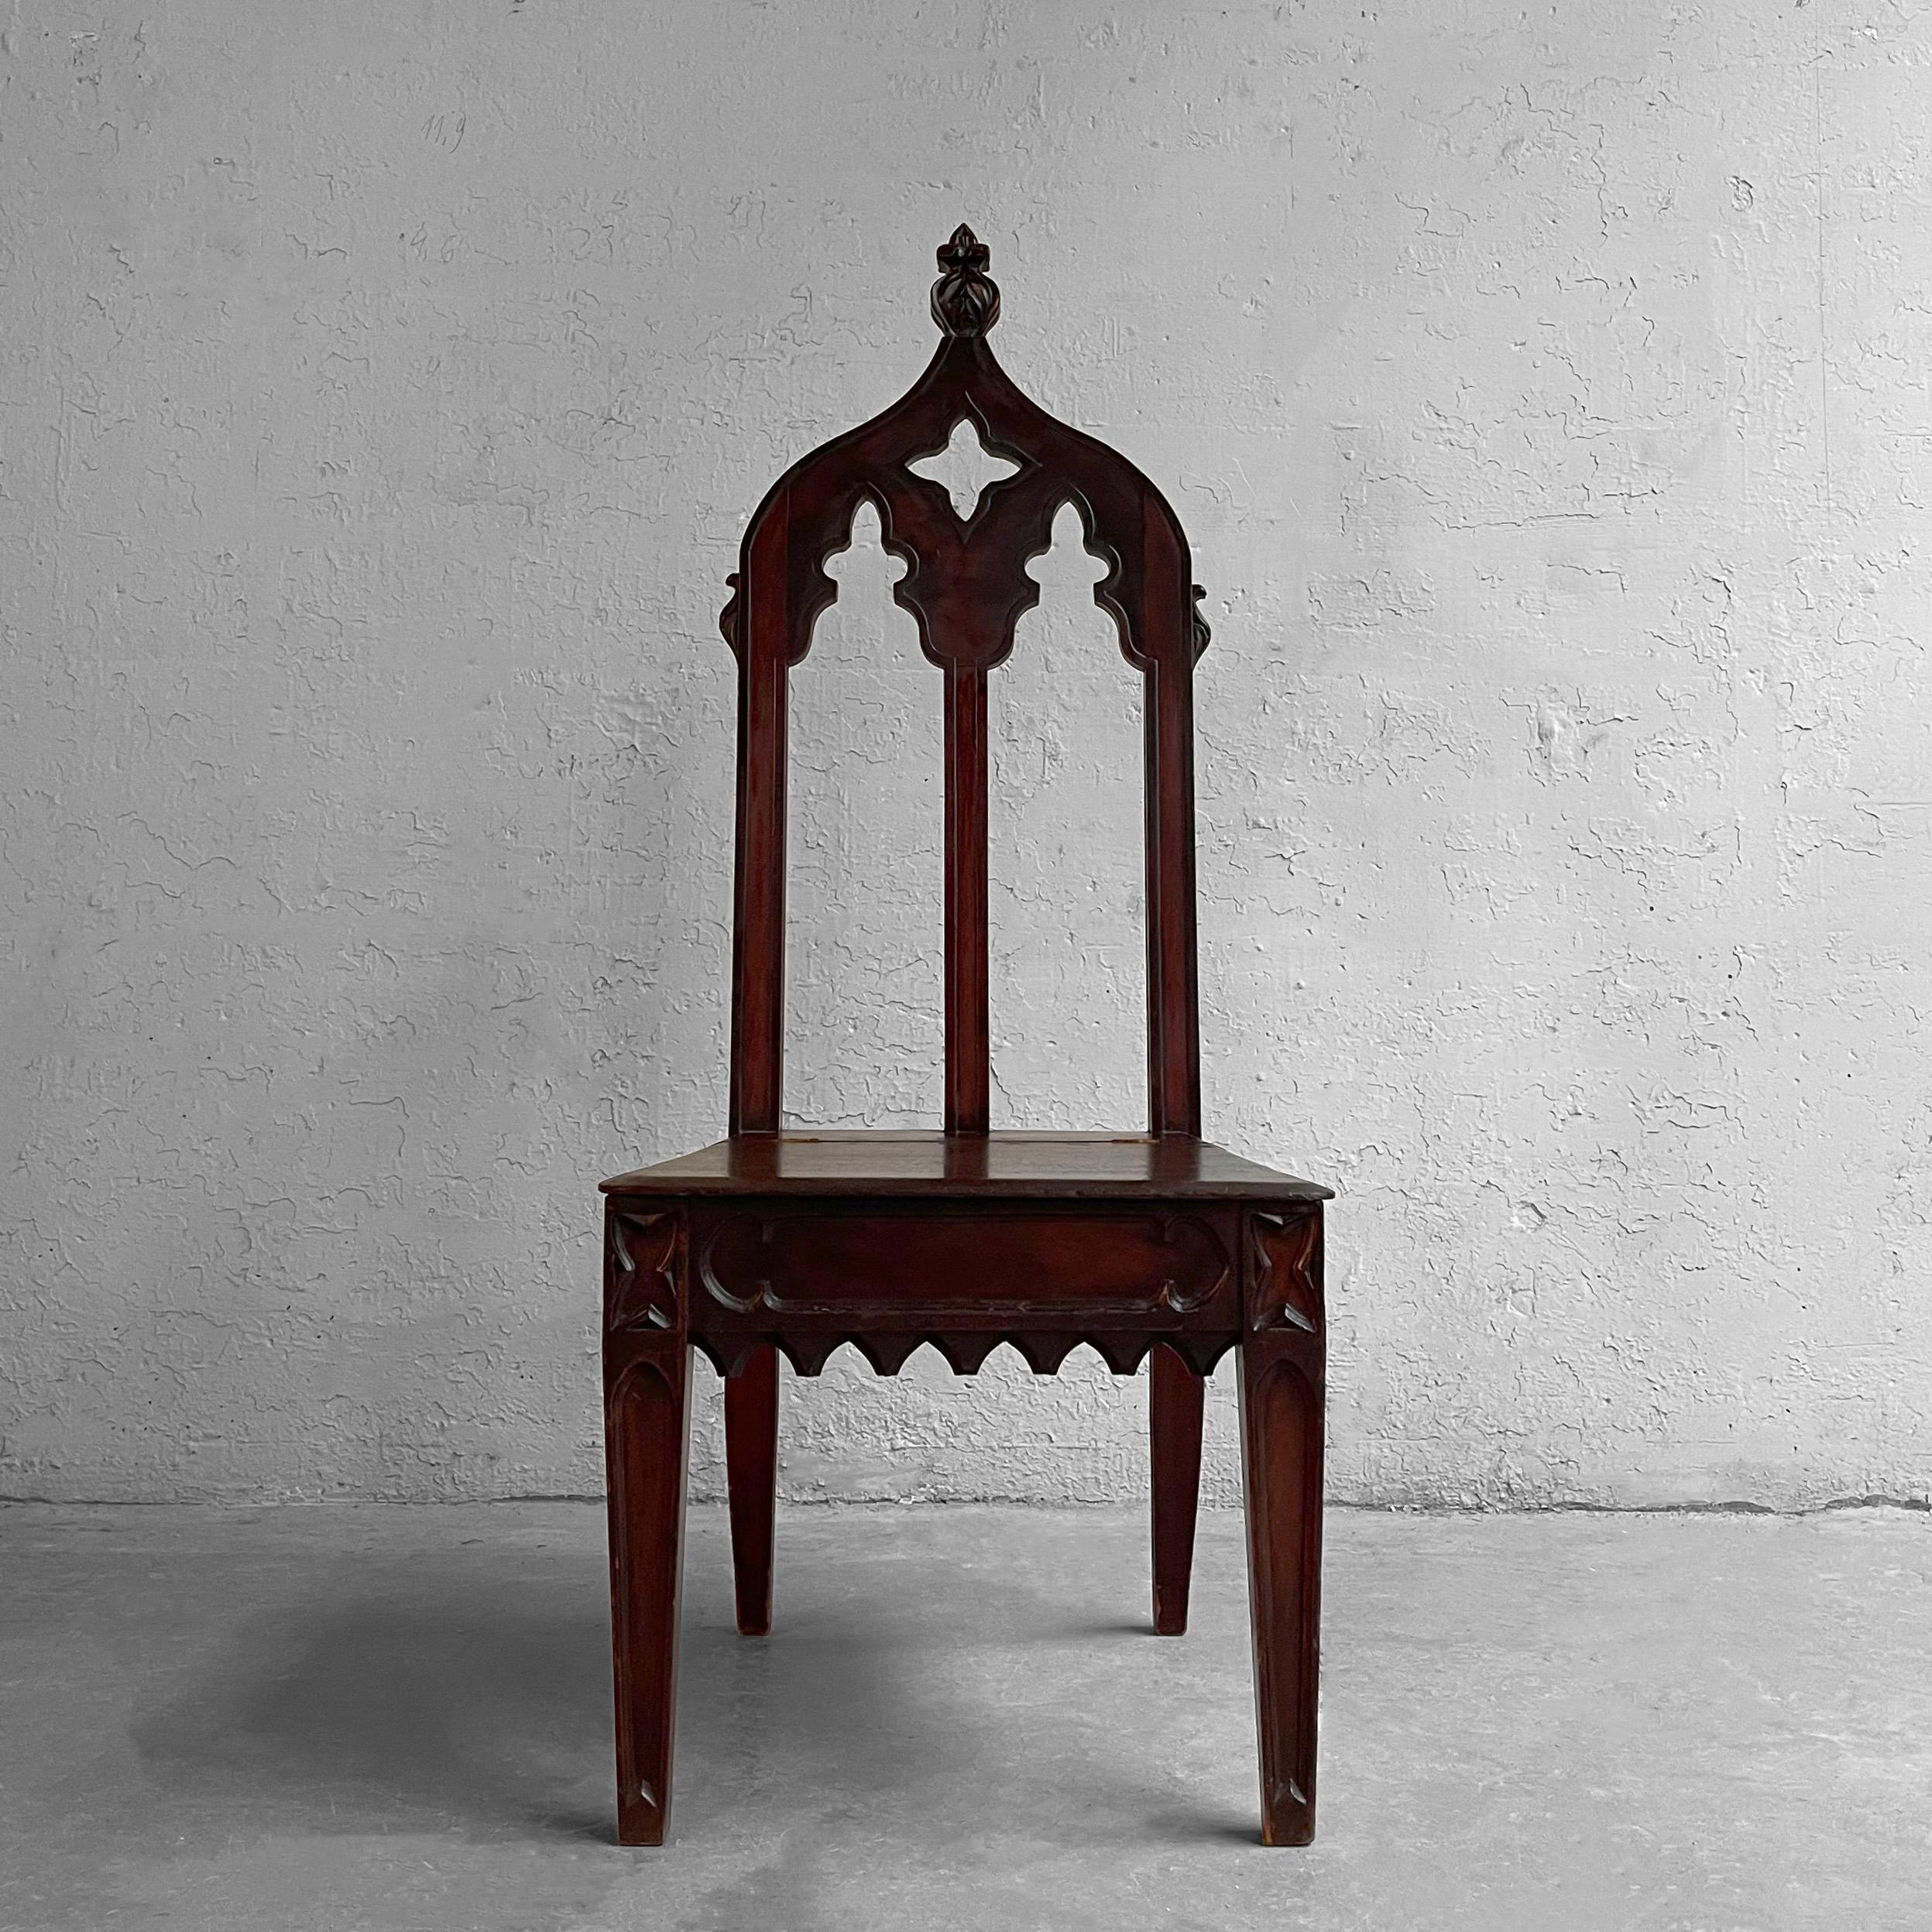 Gothic, carved mahogany church/rectory/prayer chair features a peaked high back with a storage compartment under the seat. Impressive entryway or accent chair.